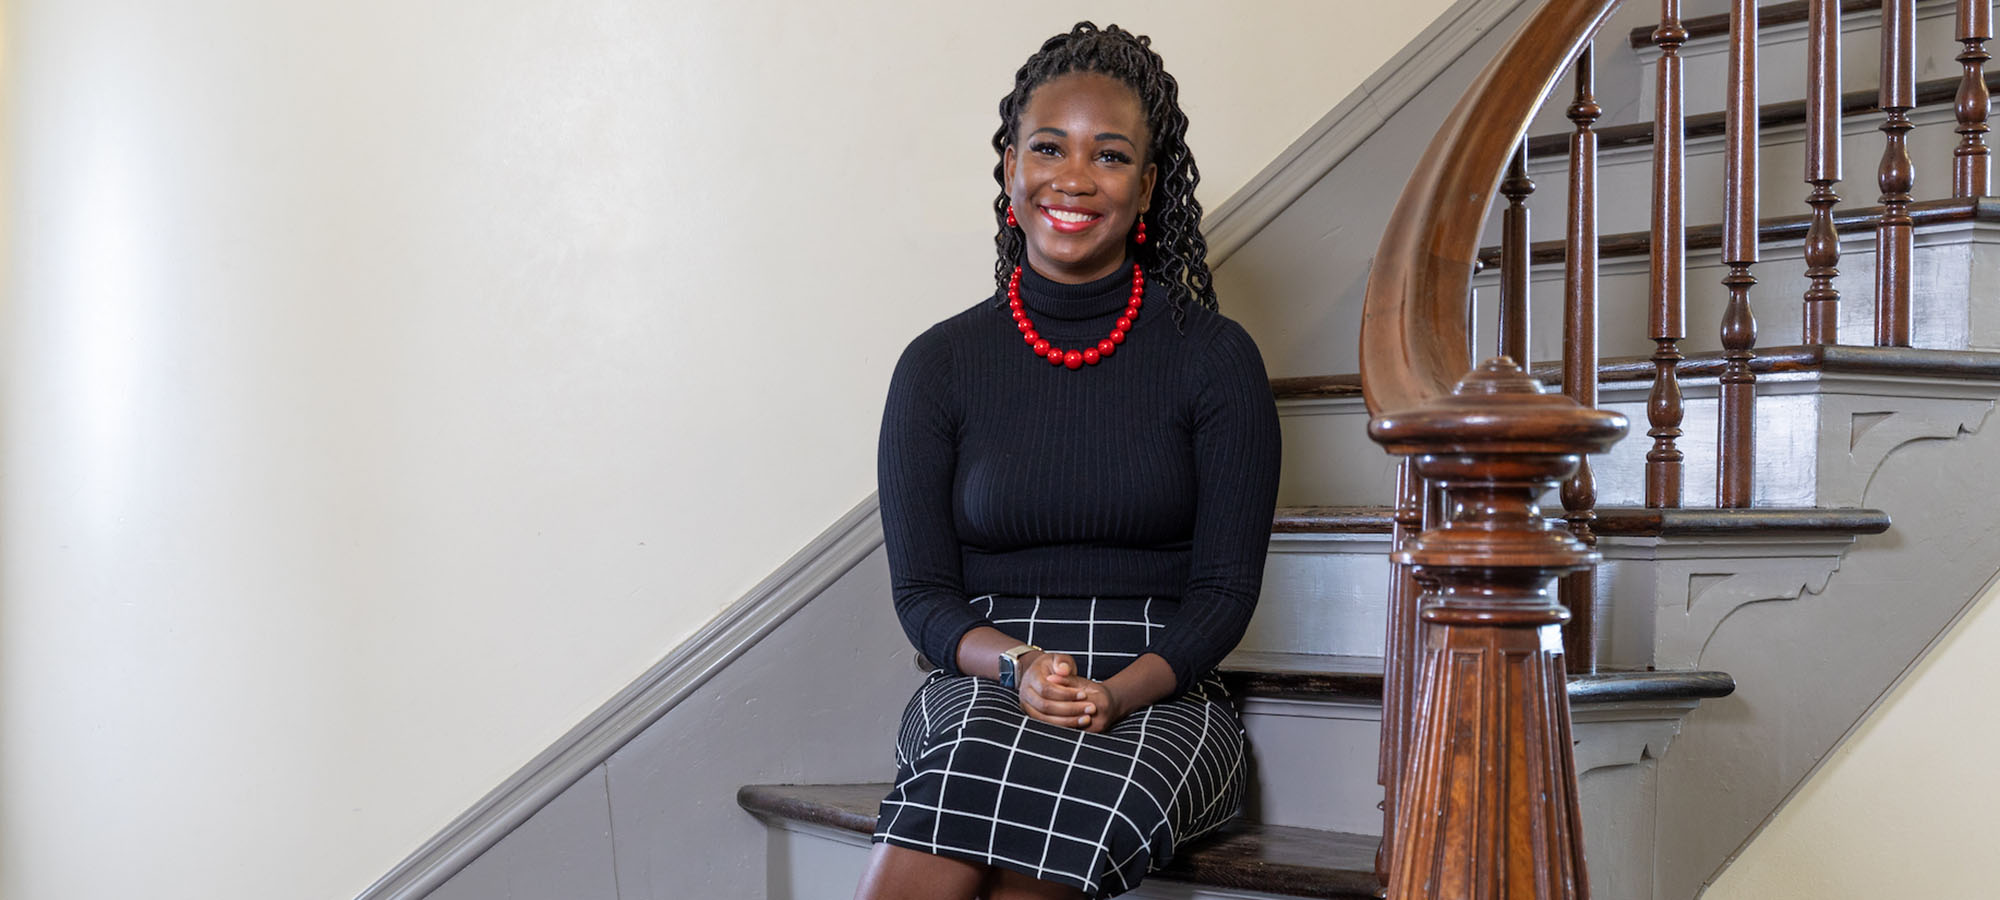 Ayana Gray, pictured here in Old Main, is the bestselling author of the “Beasts of Prey” trilogy and a 2015 alumna.